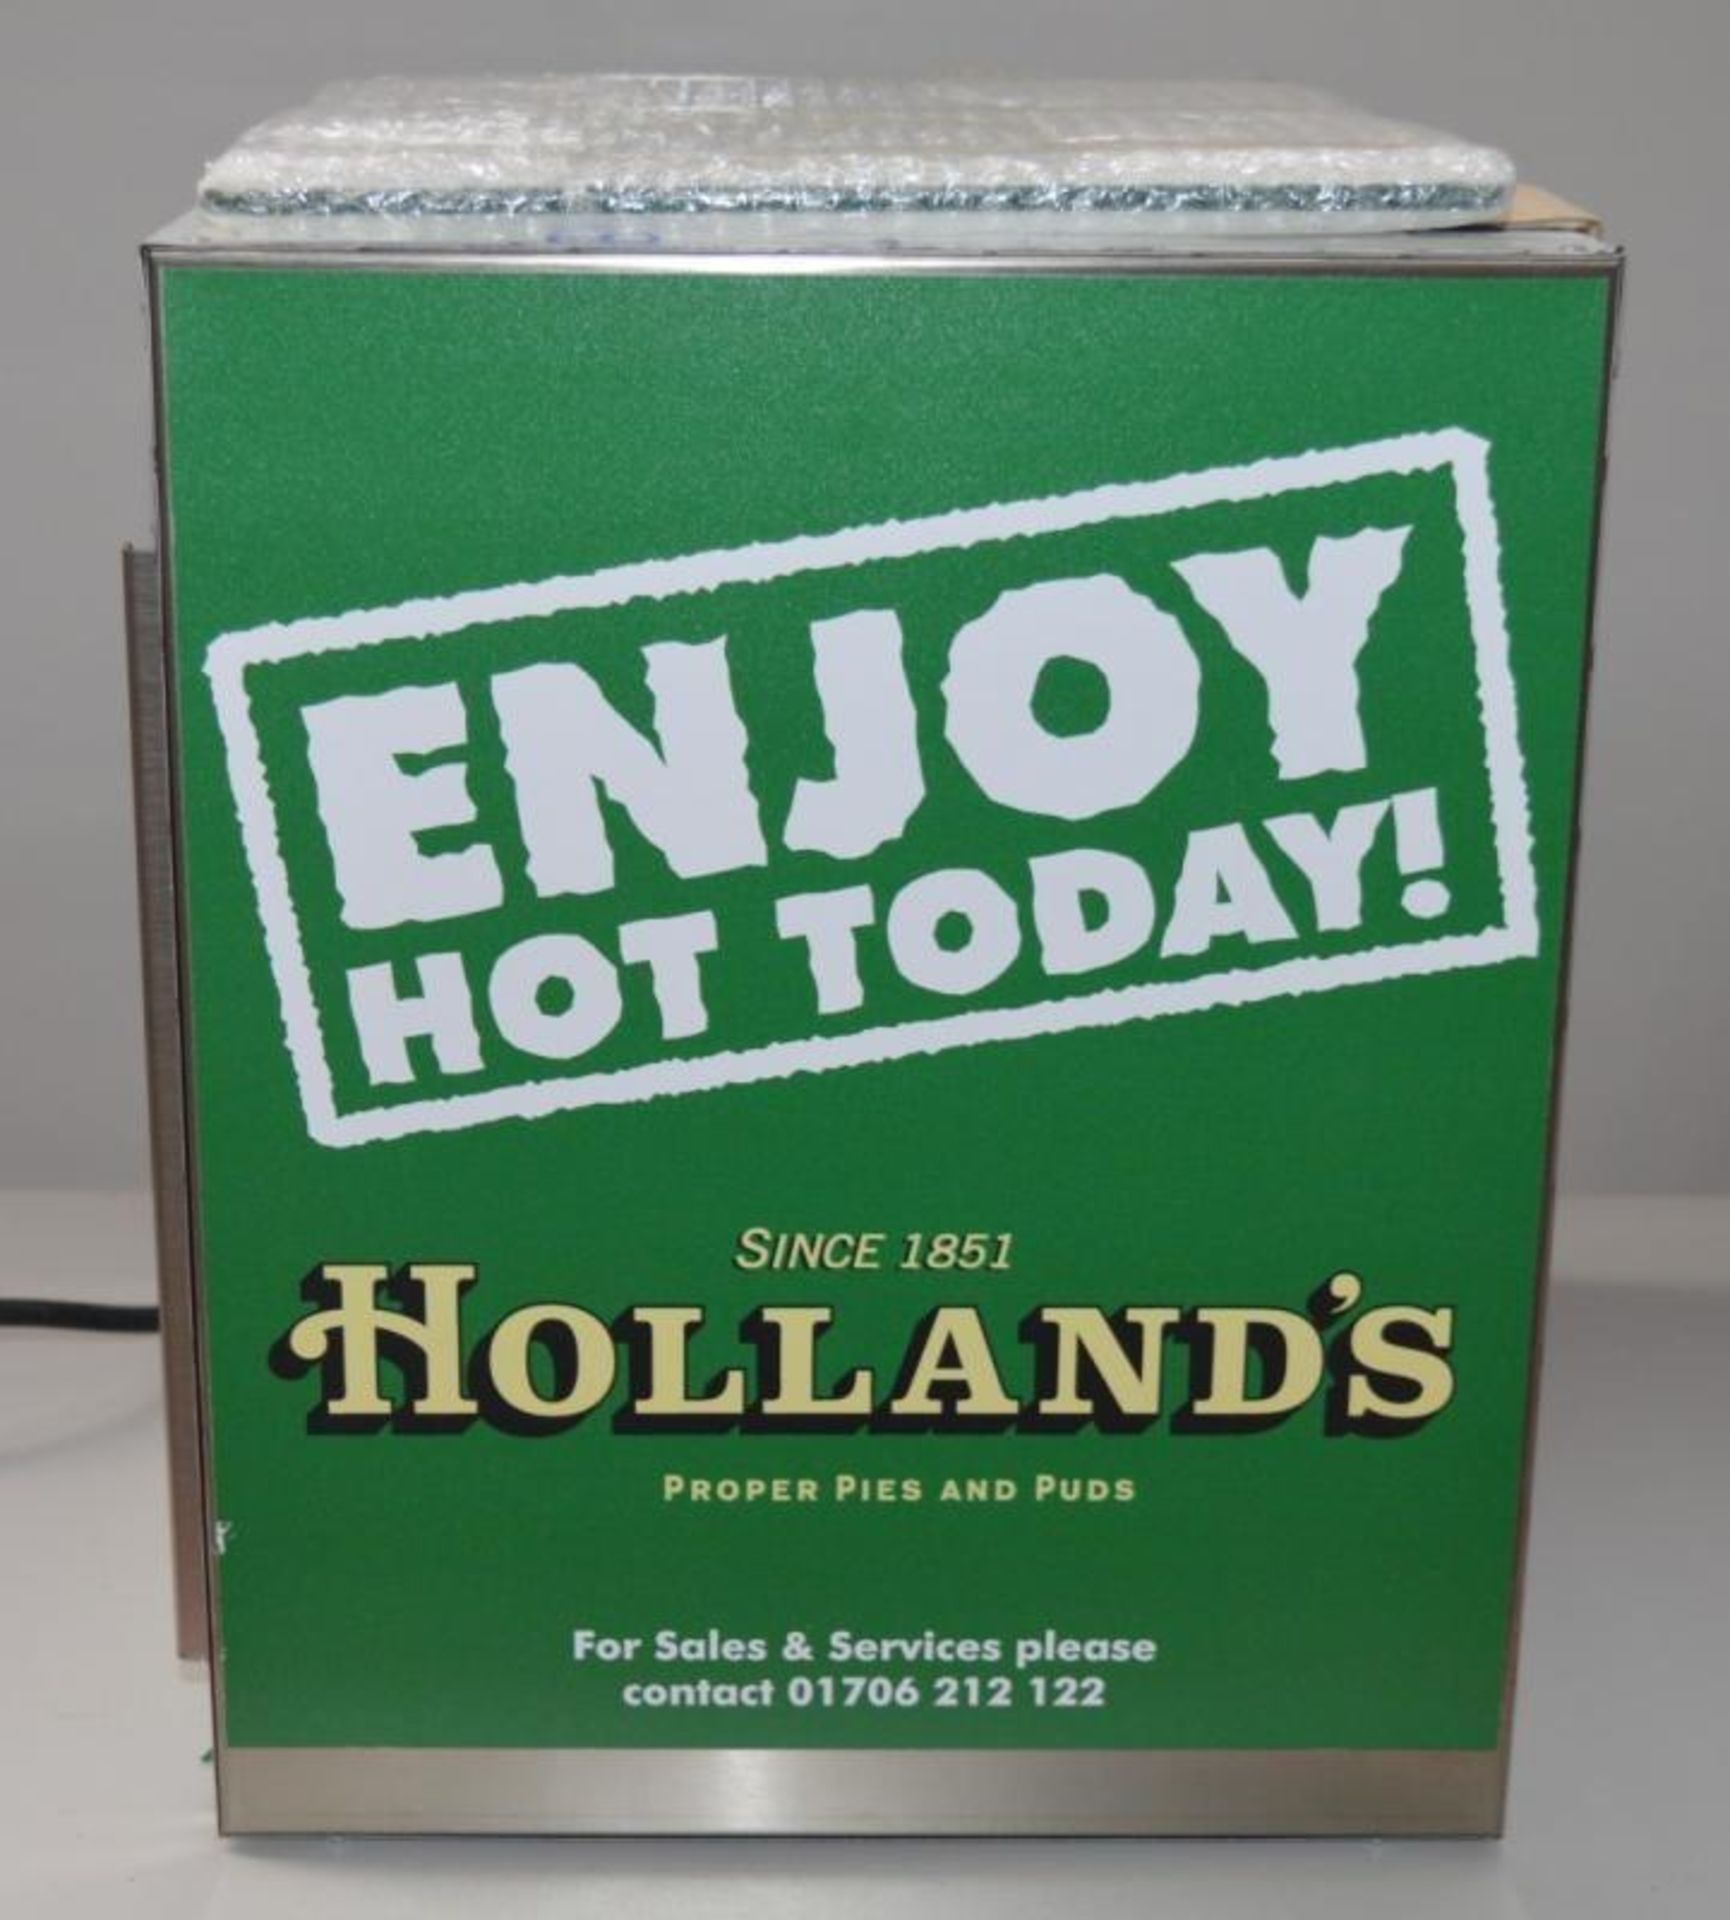 1 x Parry Electric Pie Warming Cabinet - Hollands Pie Edition - New and Unused - Features Stainless - Image 5 of 9